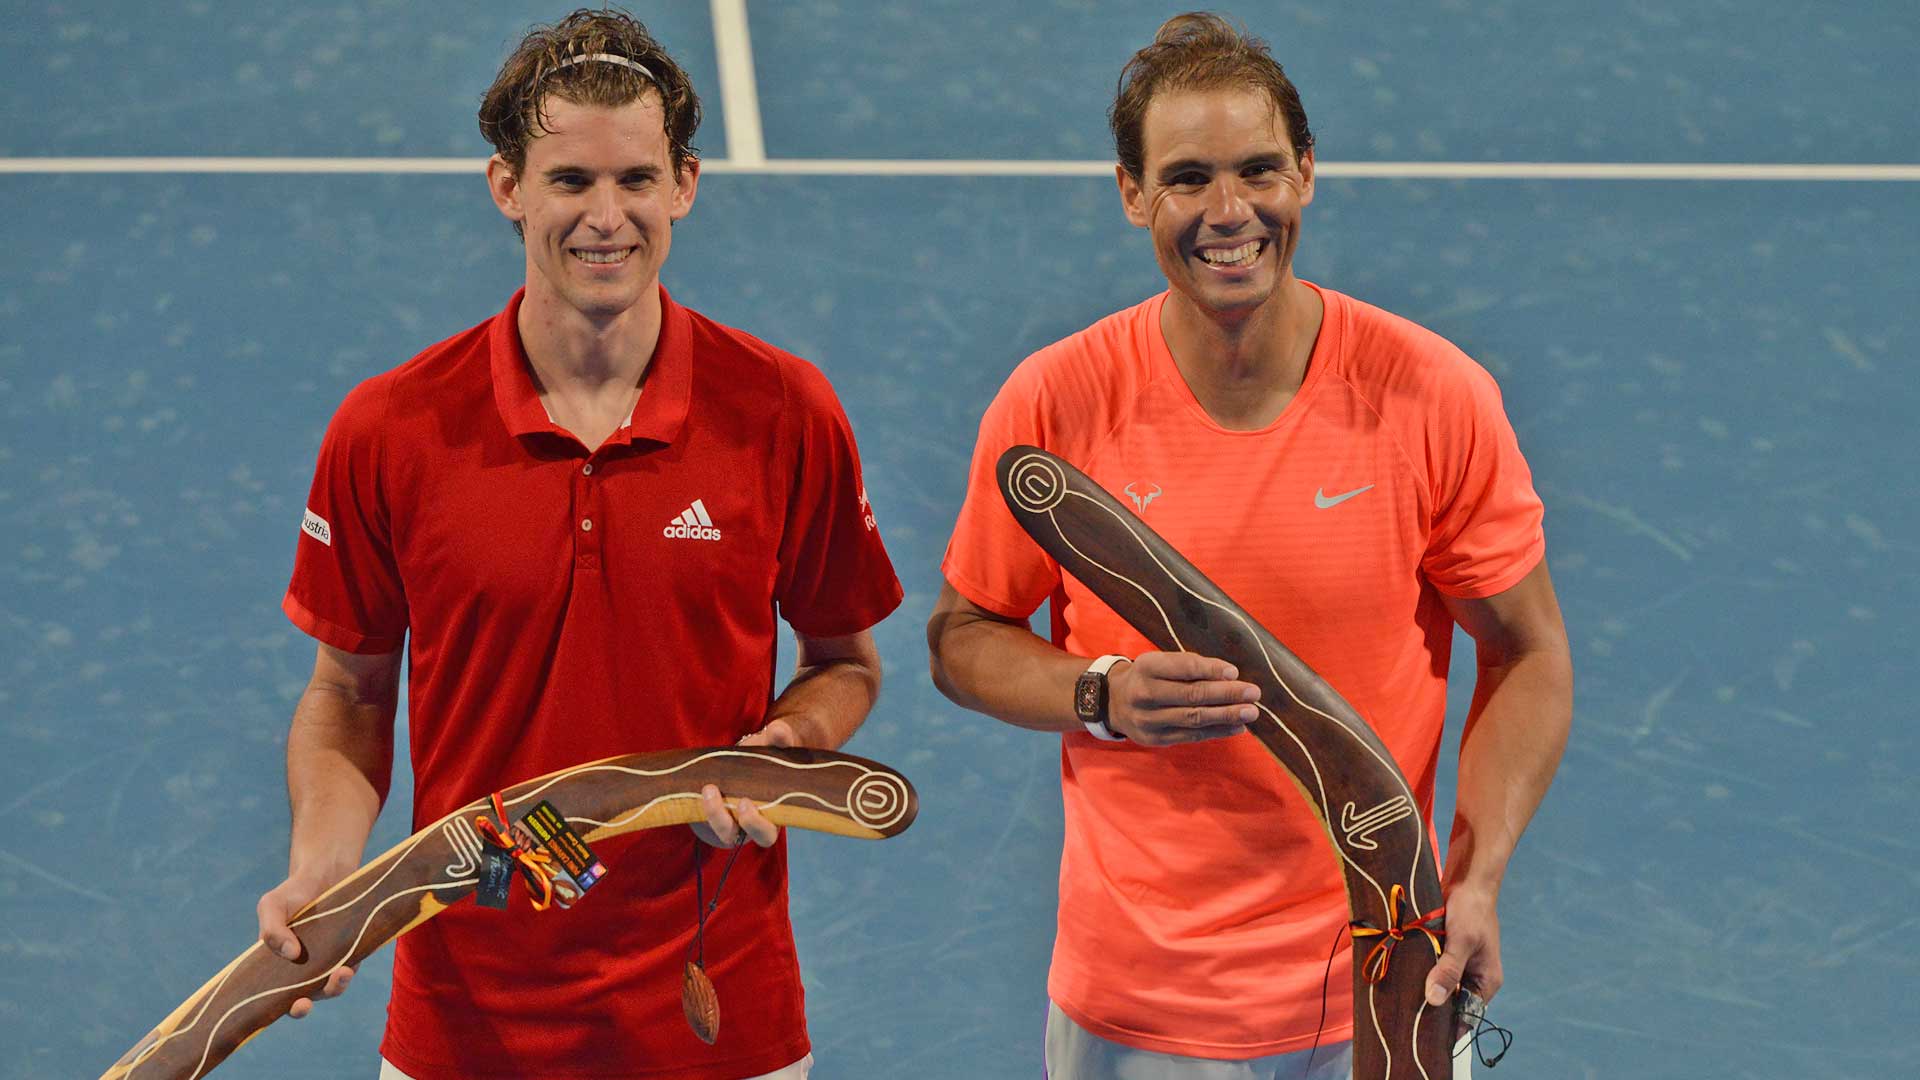 Dominic Thiem and Rafael Nadal played an exhibition in Adelaide in 2021.